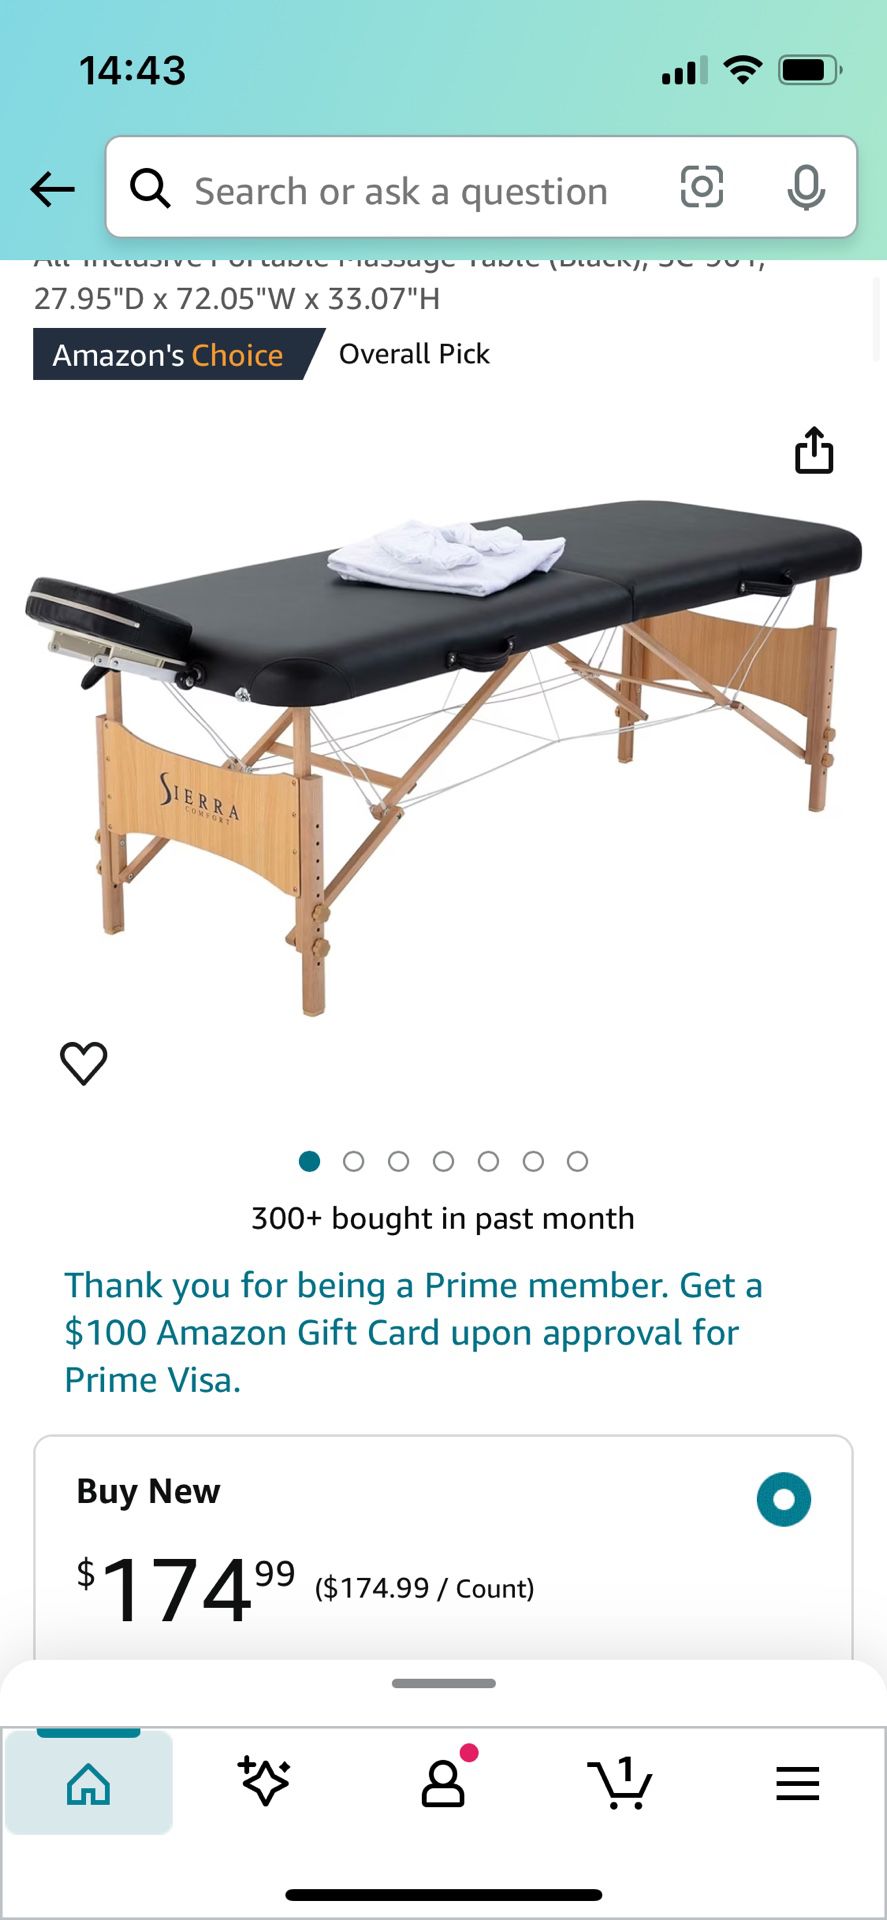 Massage / Chiropractic Table